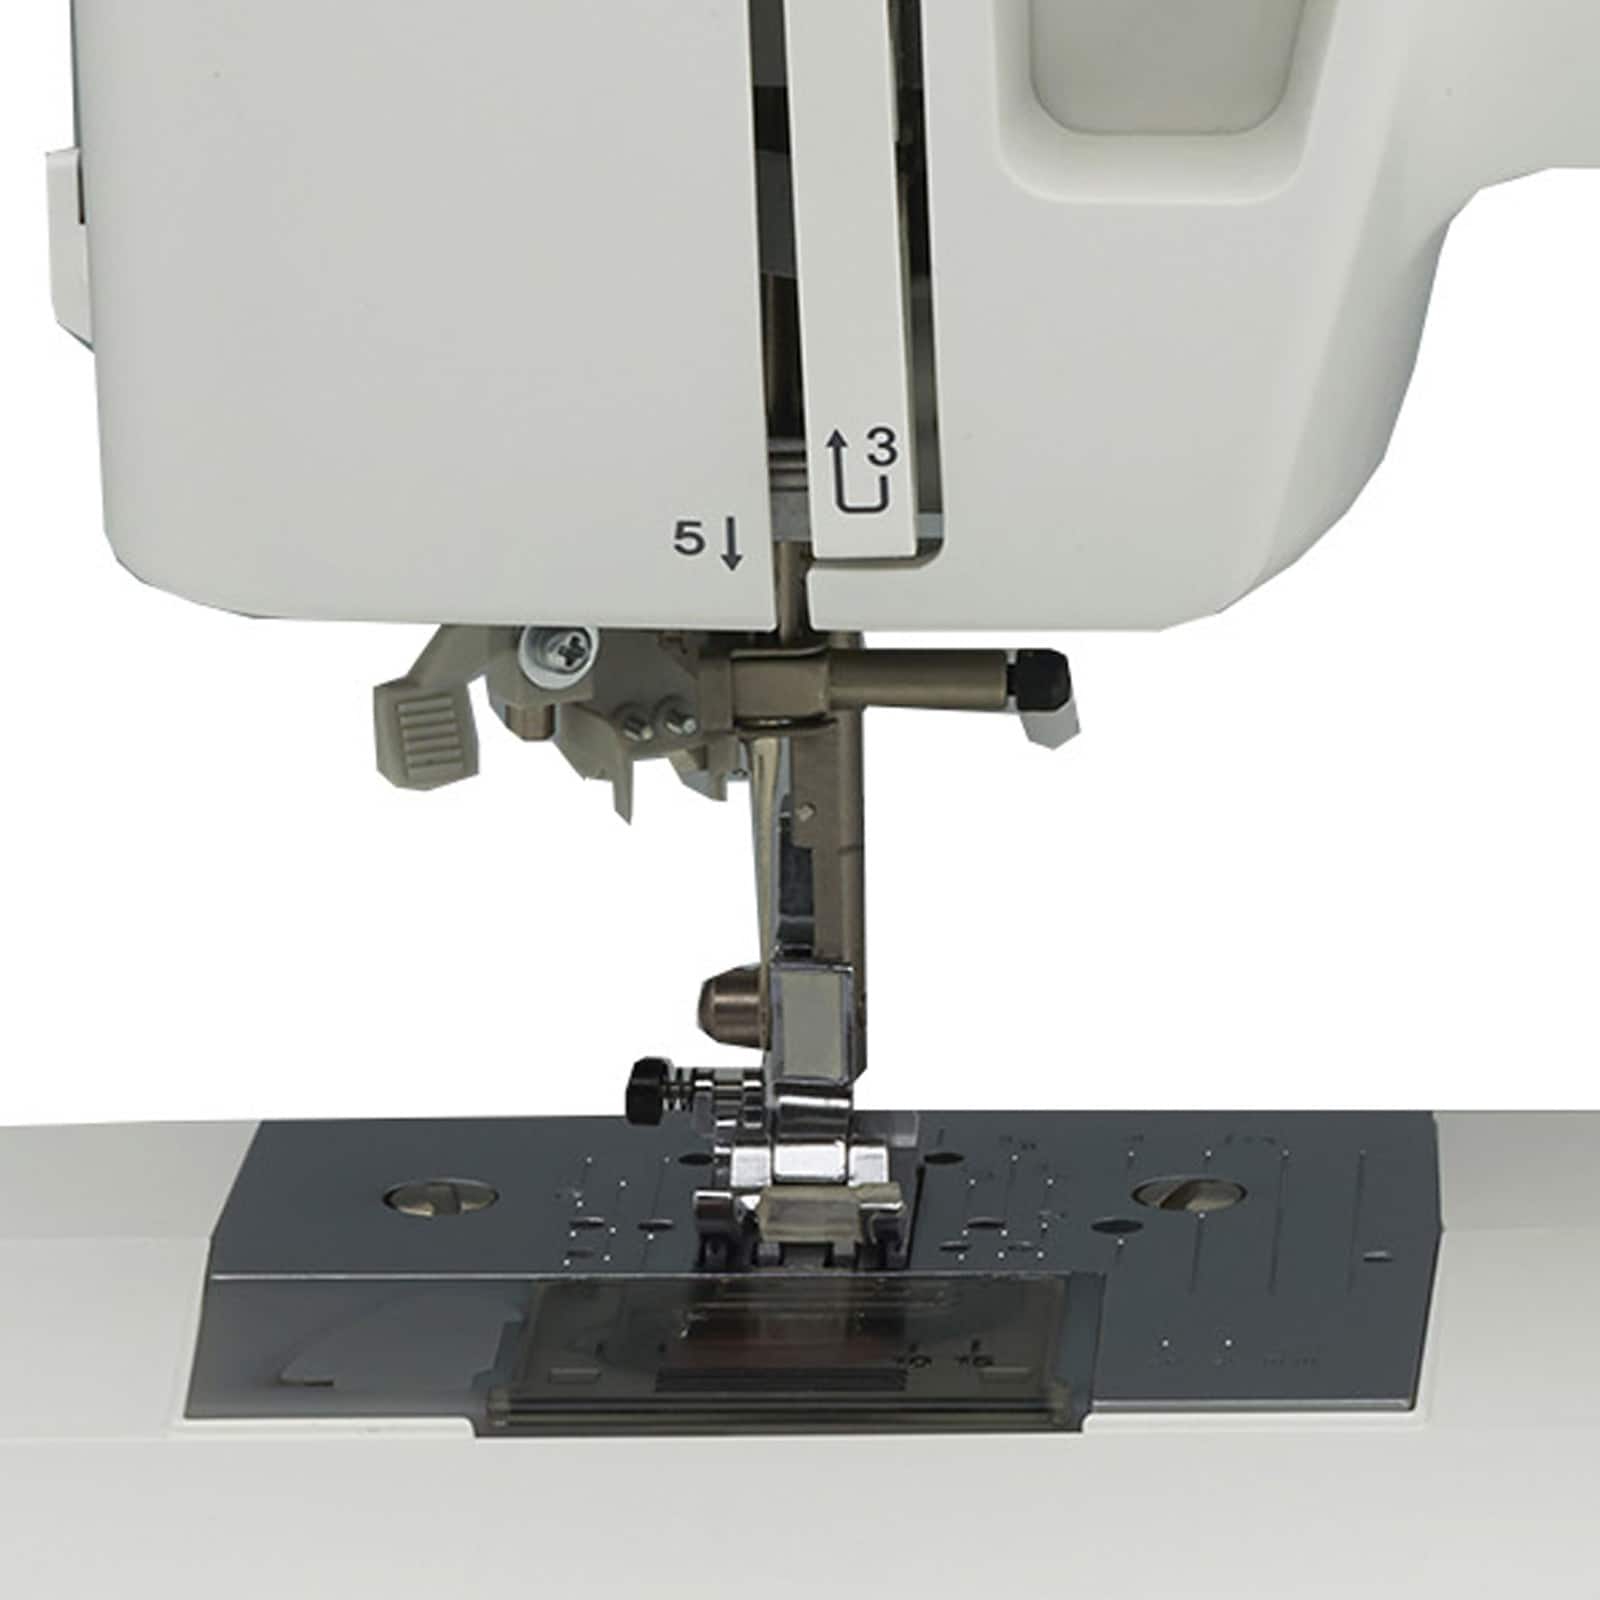 Brother ST371HD Strong and Tough Sewing Machine